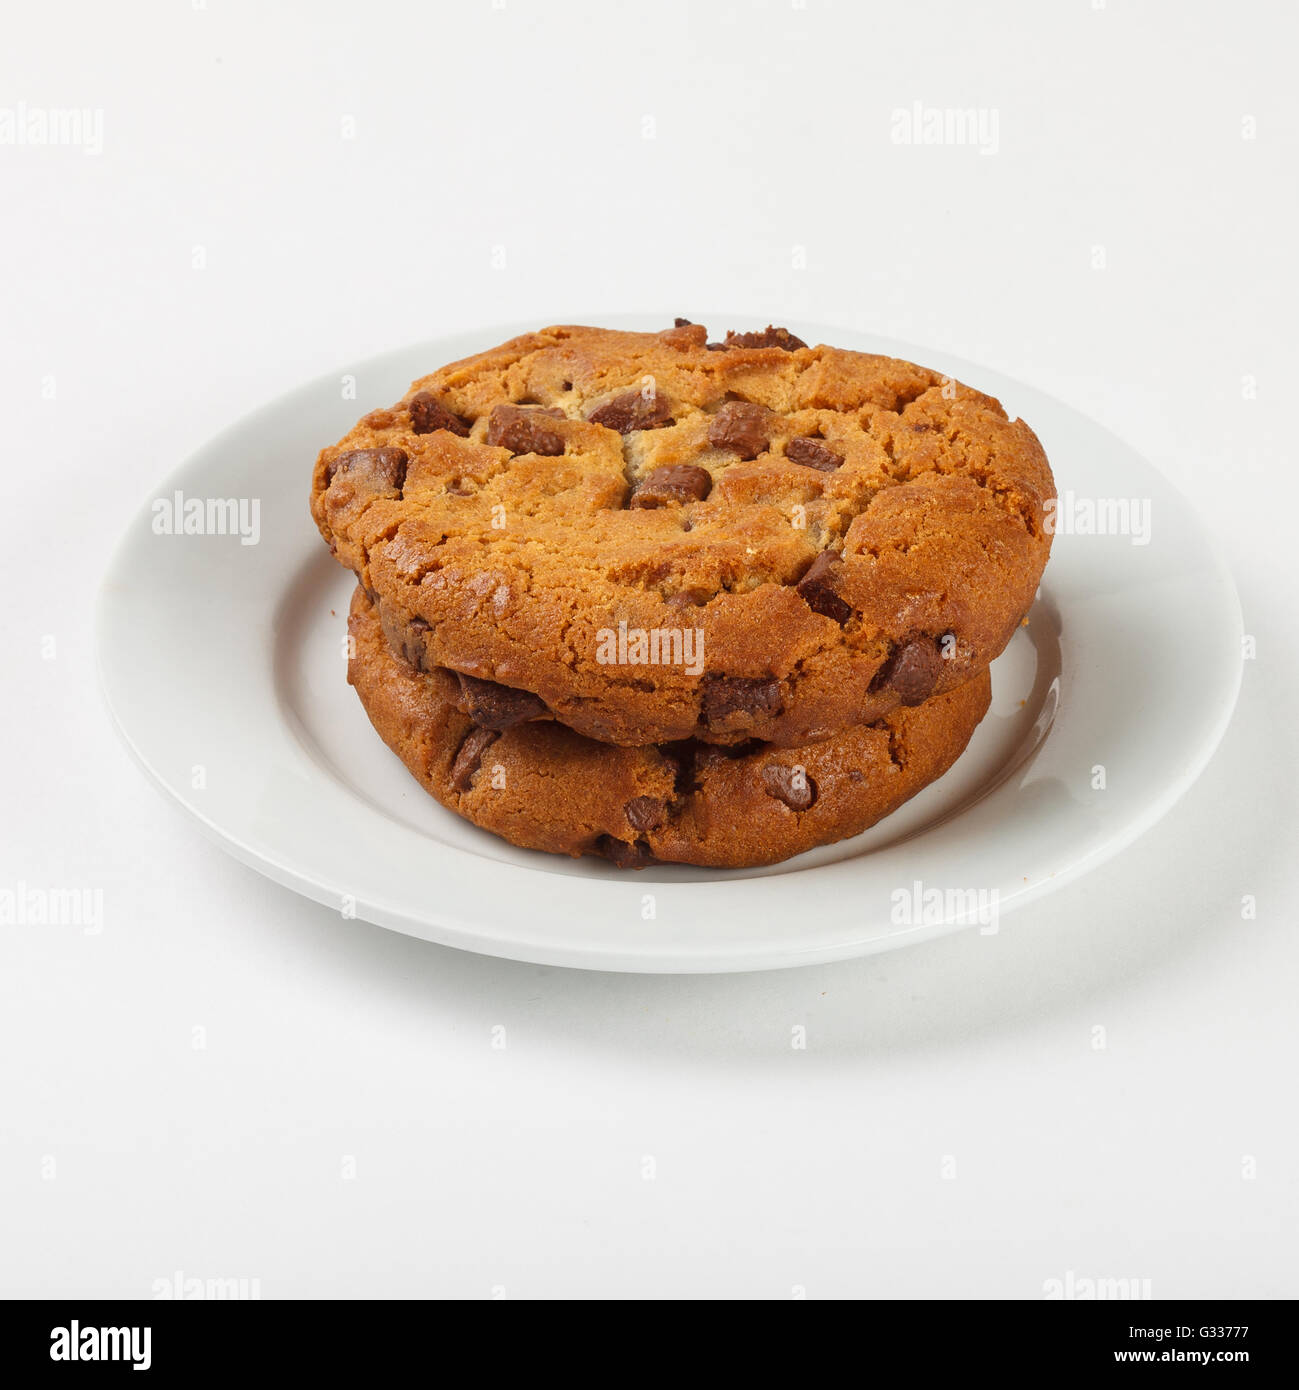 Delicious  biscuit cookies with chocolate chips on the plate on white background.Close up side view. Stock Photo